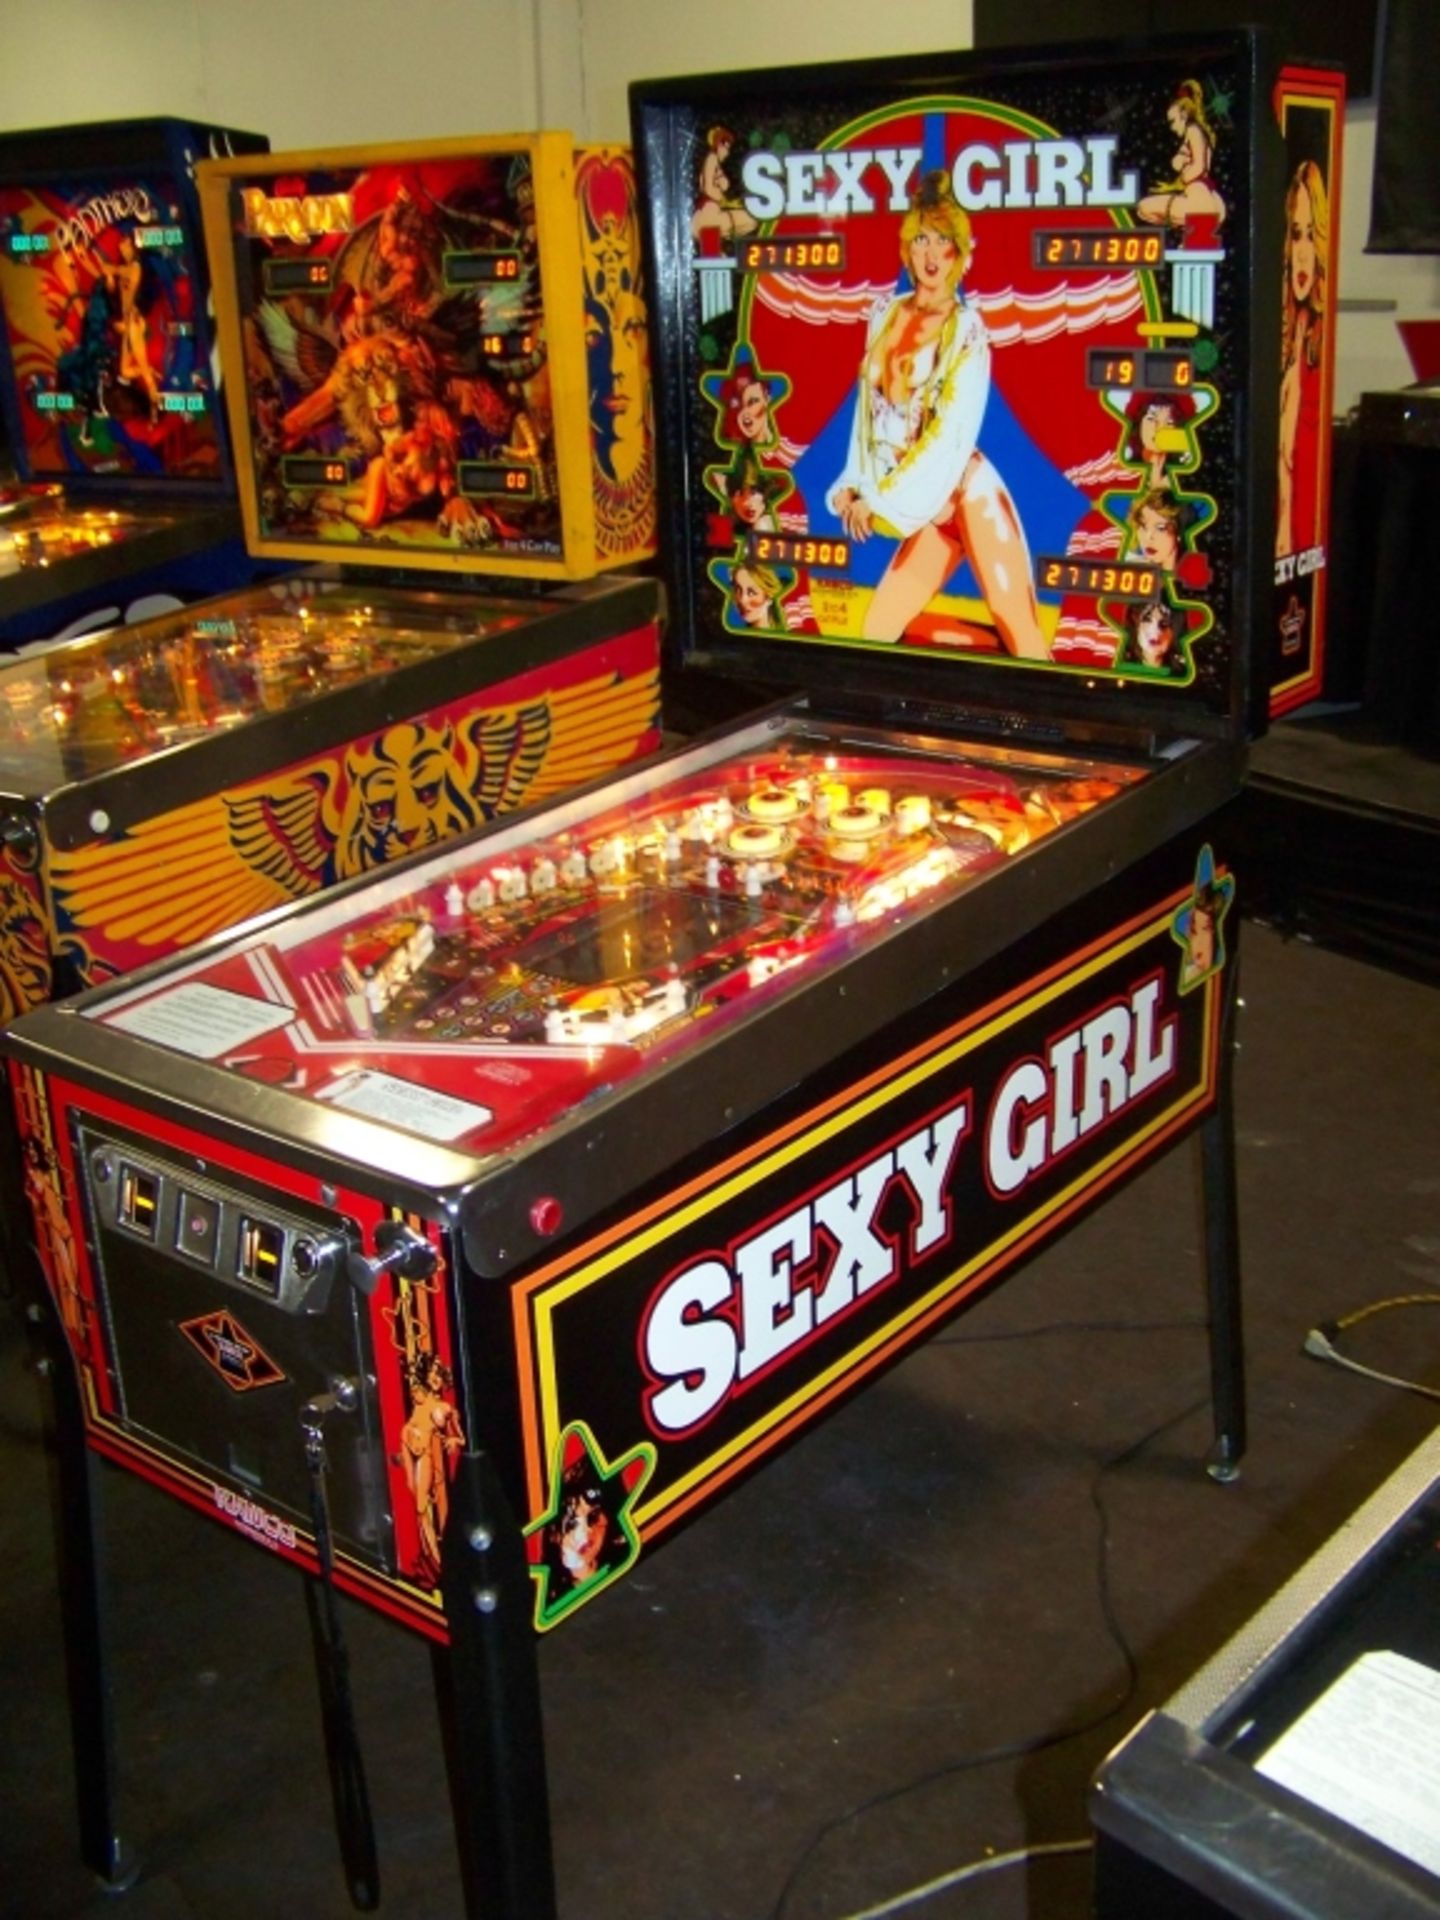 SEXY GIRL PINBALL MACHINE 1980 RANCO AUTOMATEN Item is in used condition. Evidence of wear and - Image 2 of 10